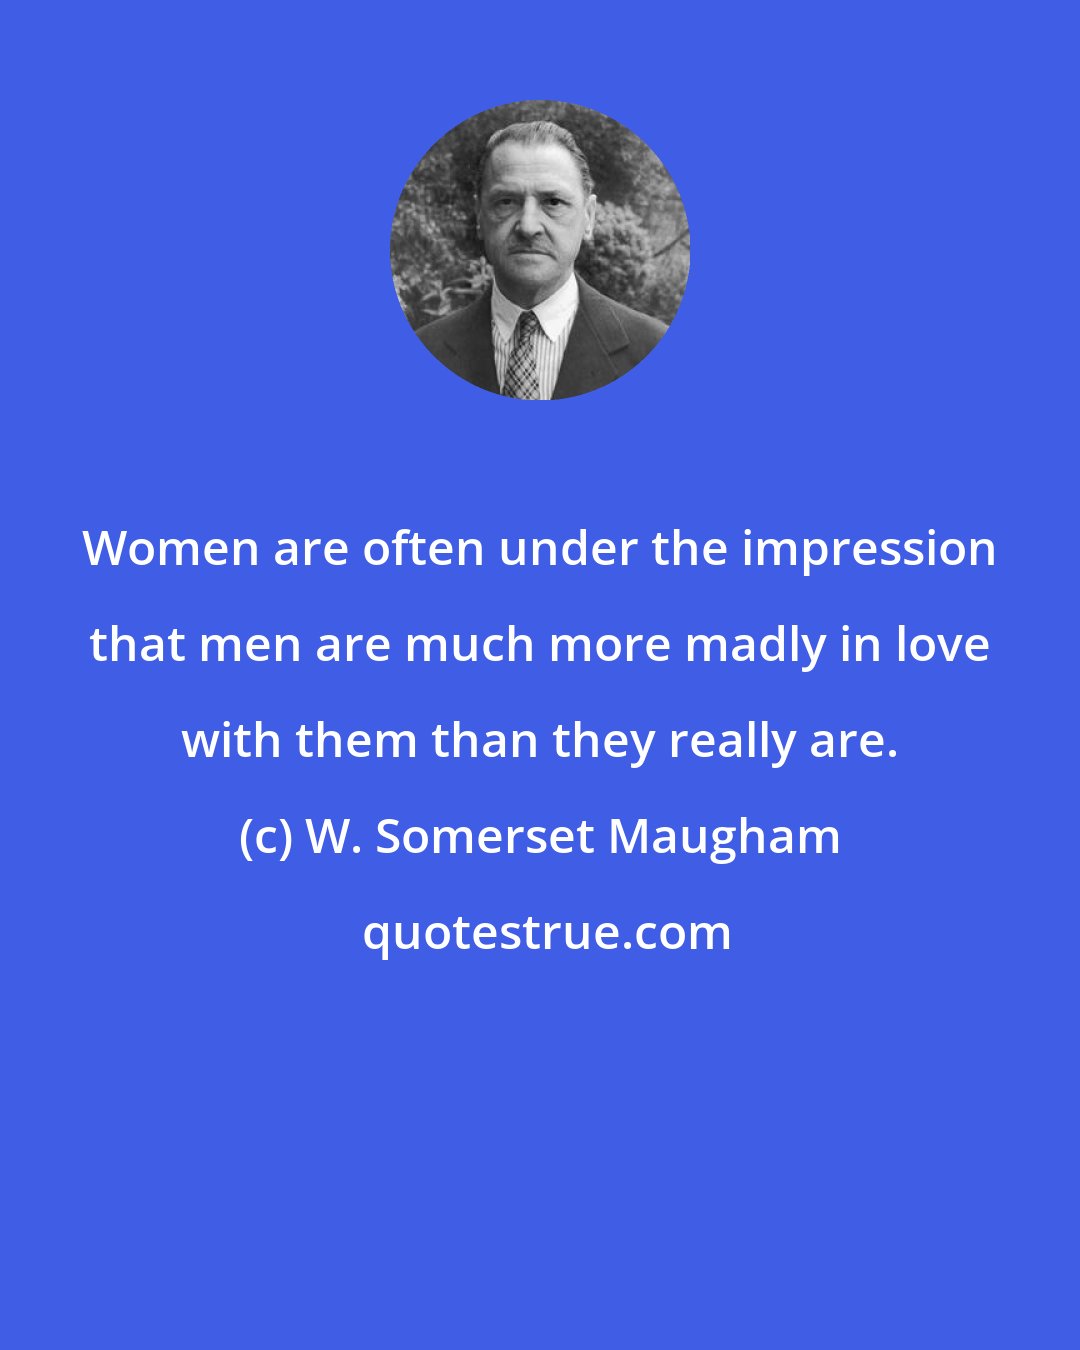 W. Somerset Maugham: Women are often under the impression that men are much more madly in love with them than they really are.